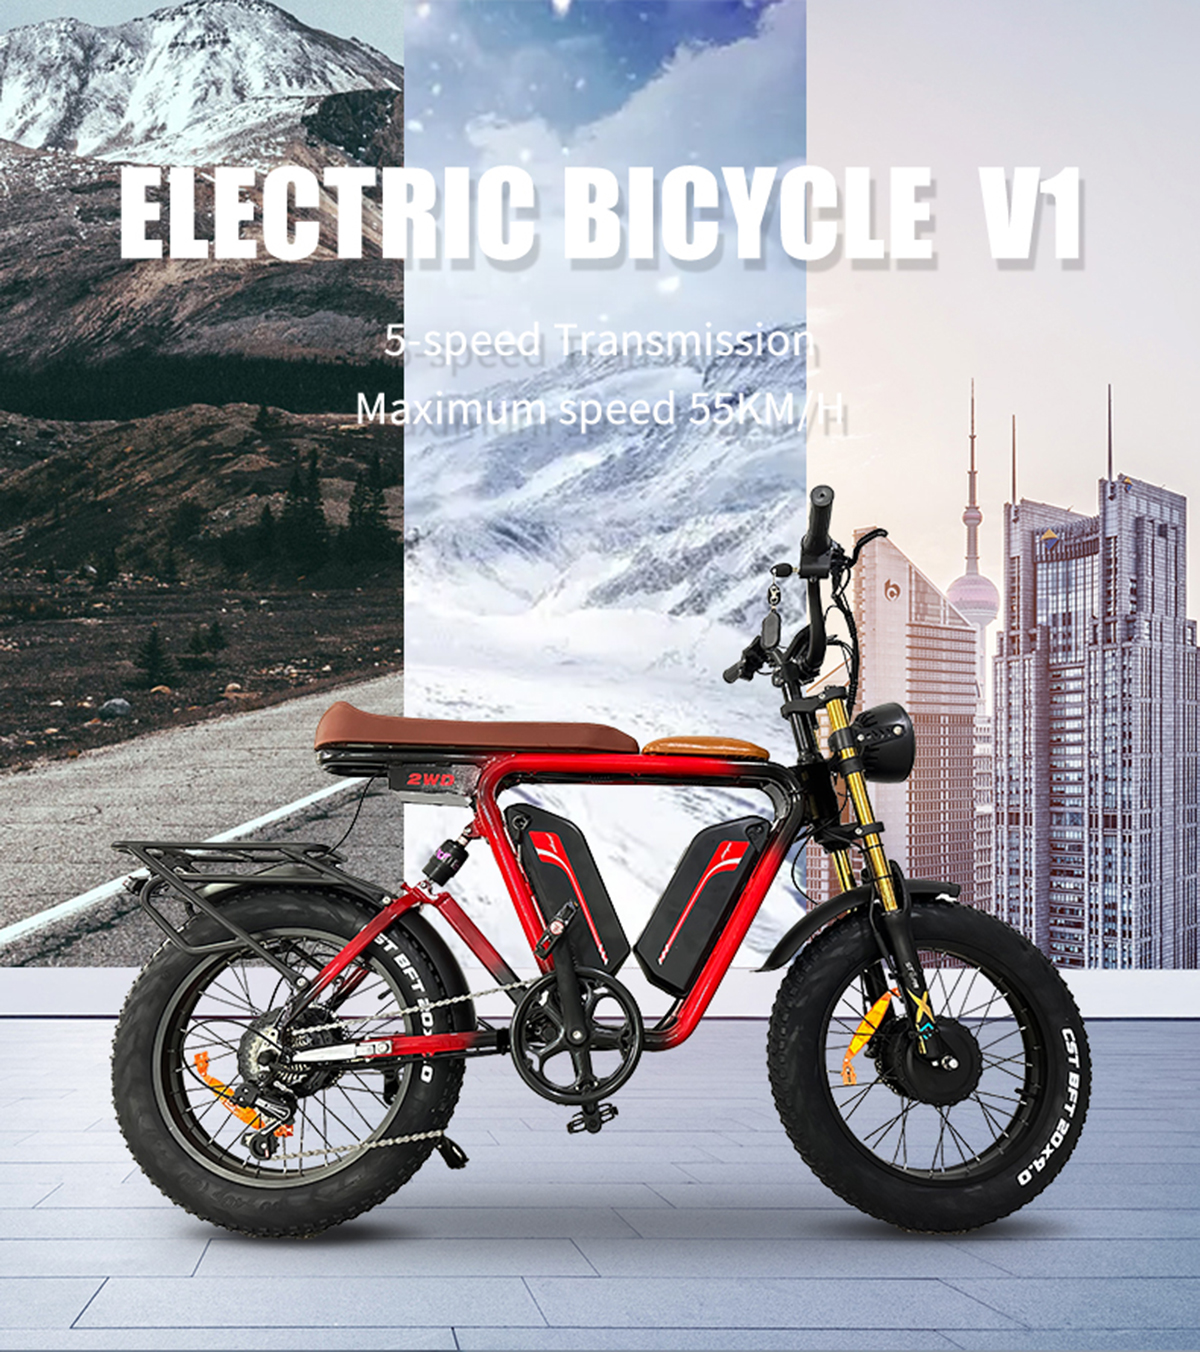 80-90kmPure Electric Cruising Range 55kmh With 5 Speed Electric Bike Details 1